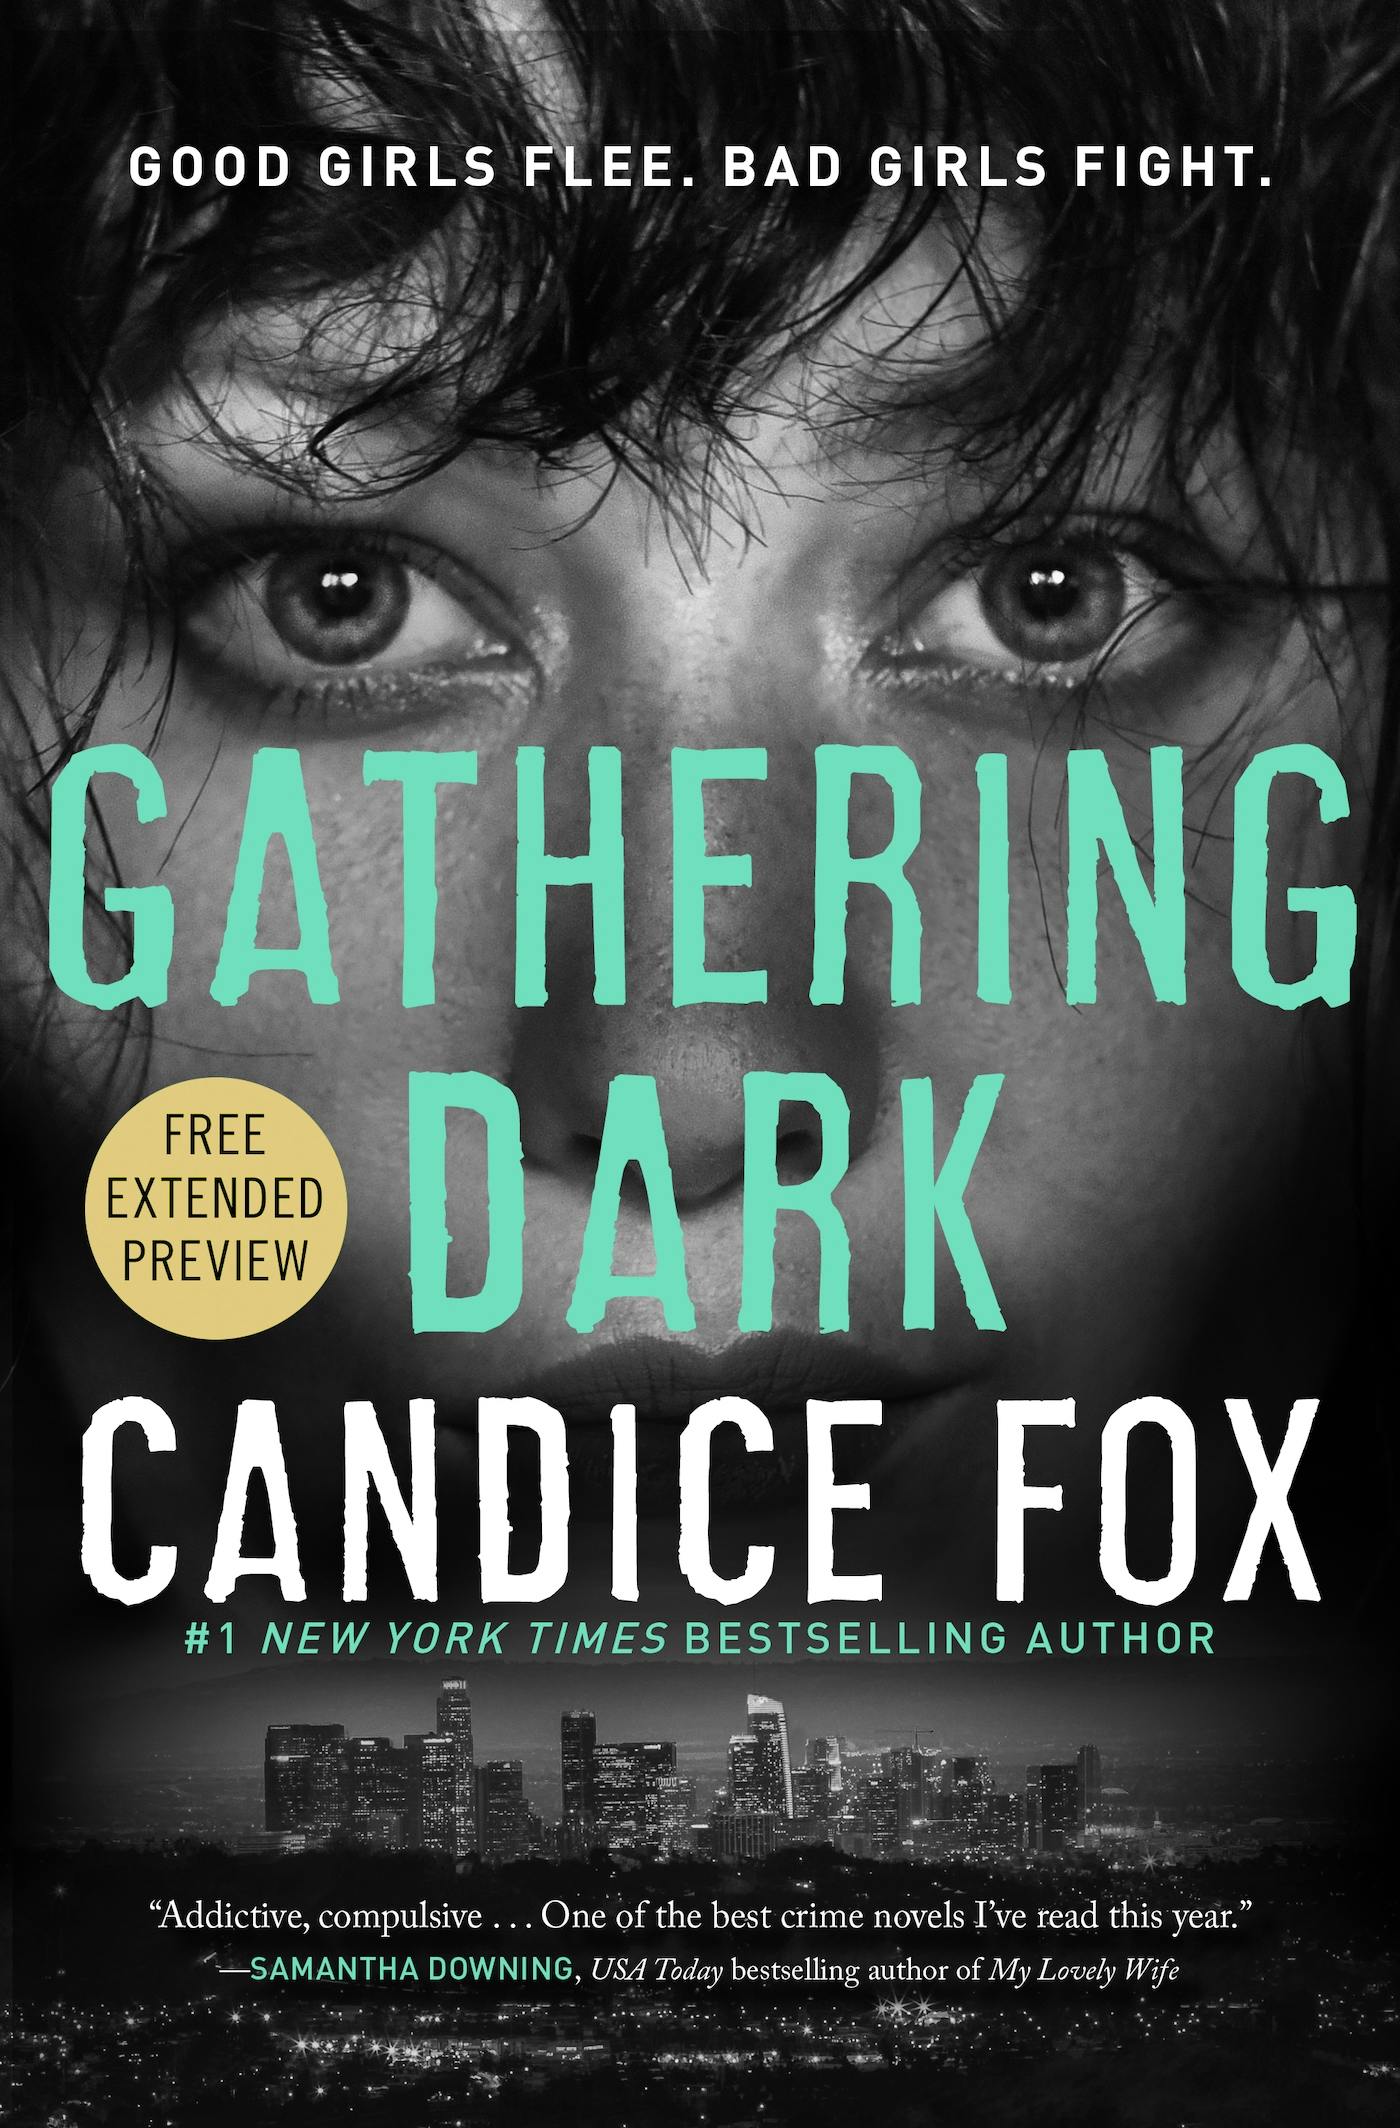 Cover for the book titled as: Gathering Dark Sneak Peek